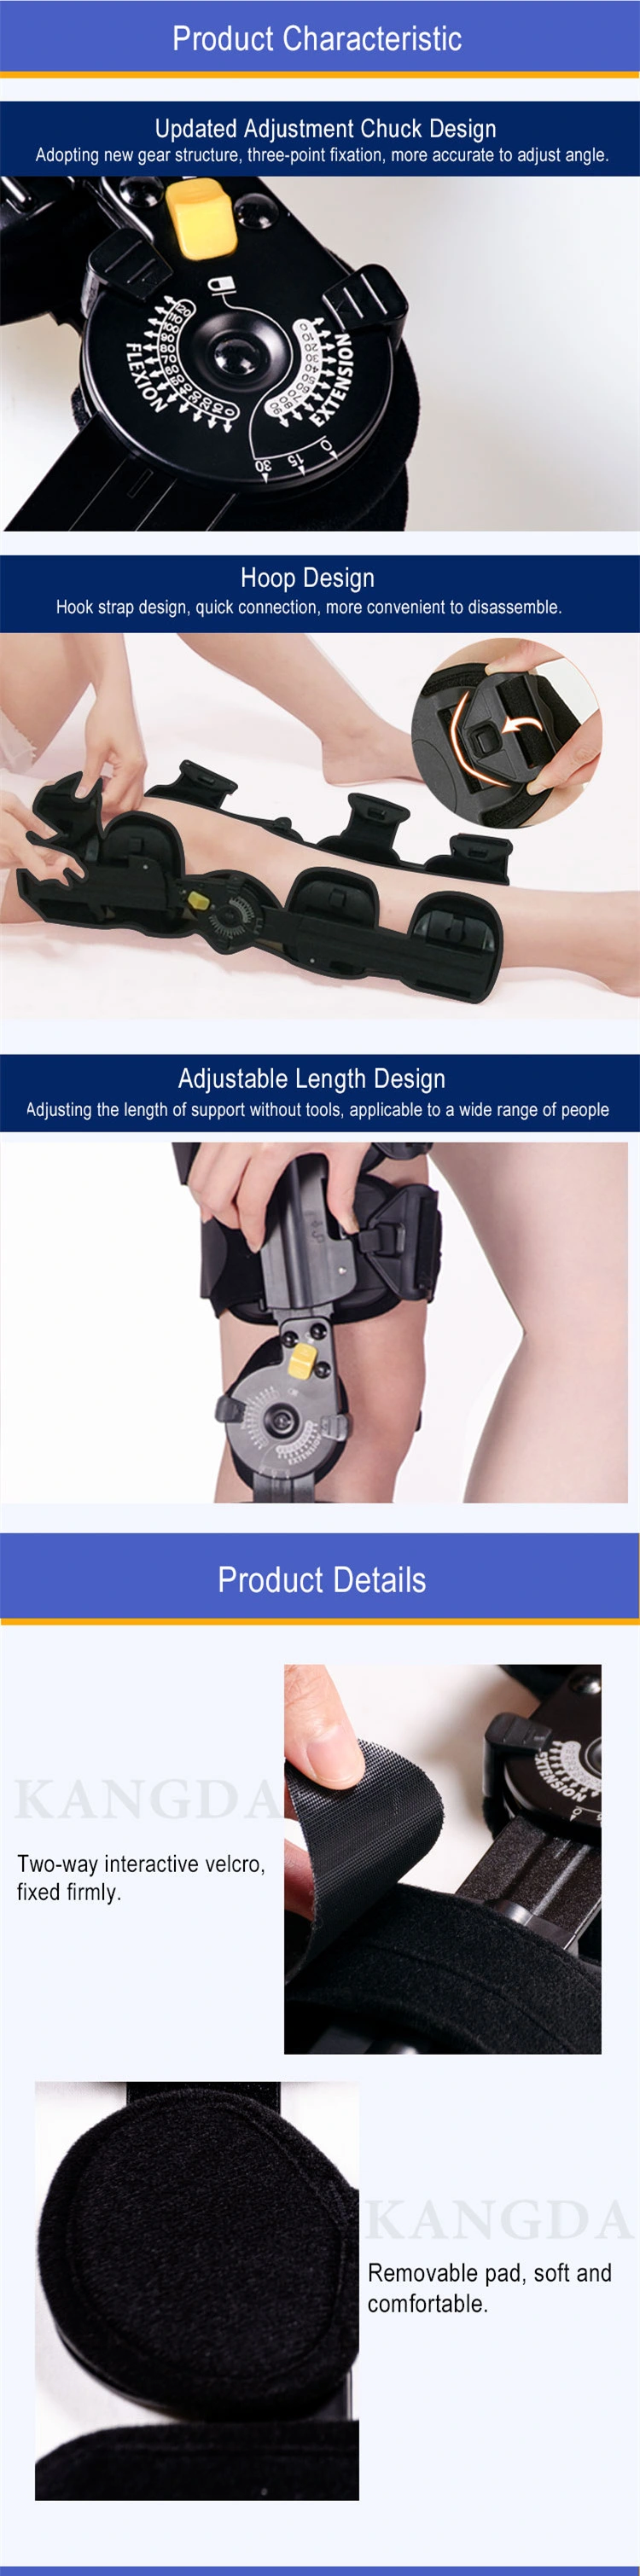 Kangda Black Universal Angle Adjustable ROM Knee Brace for Correction of Knee Contracture